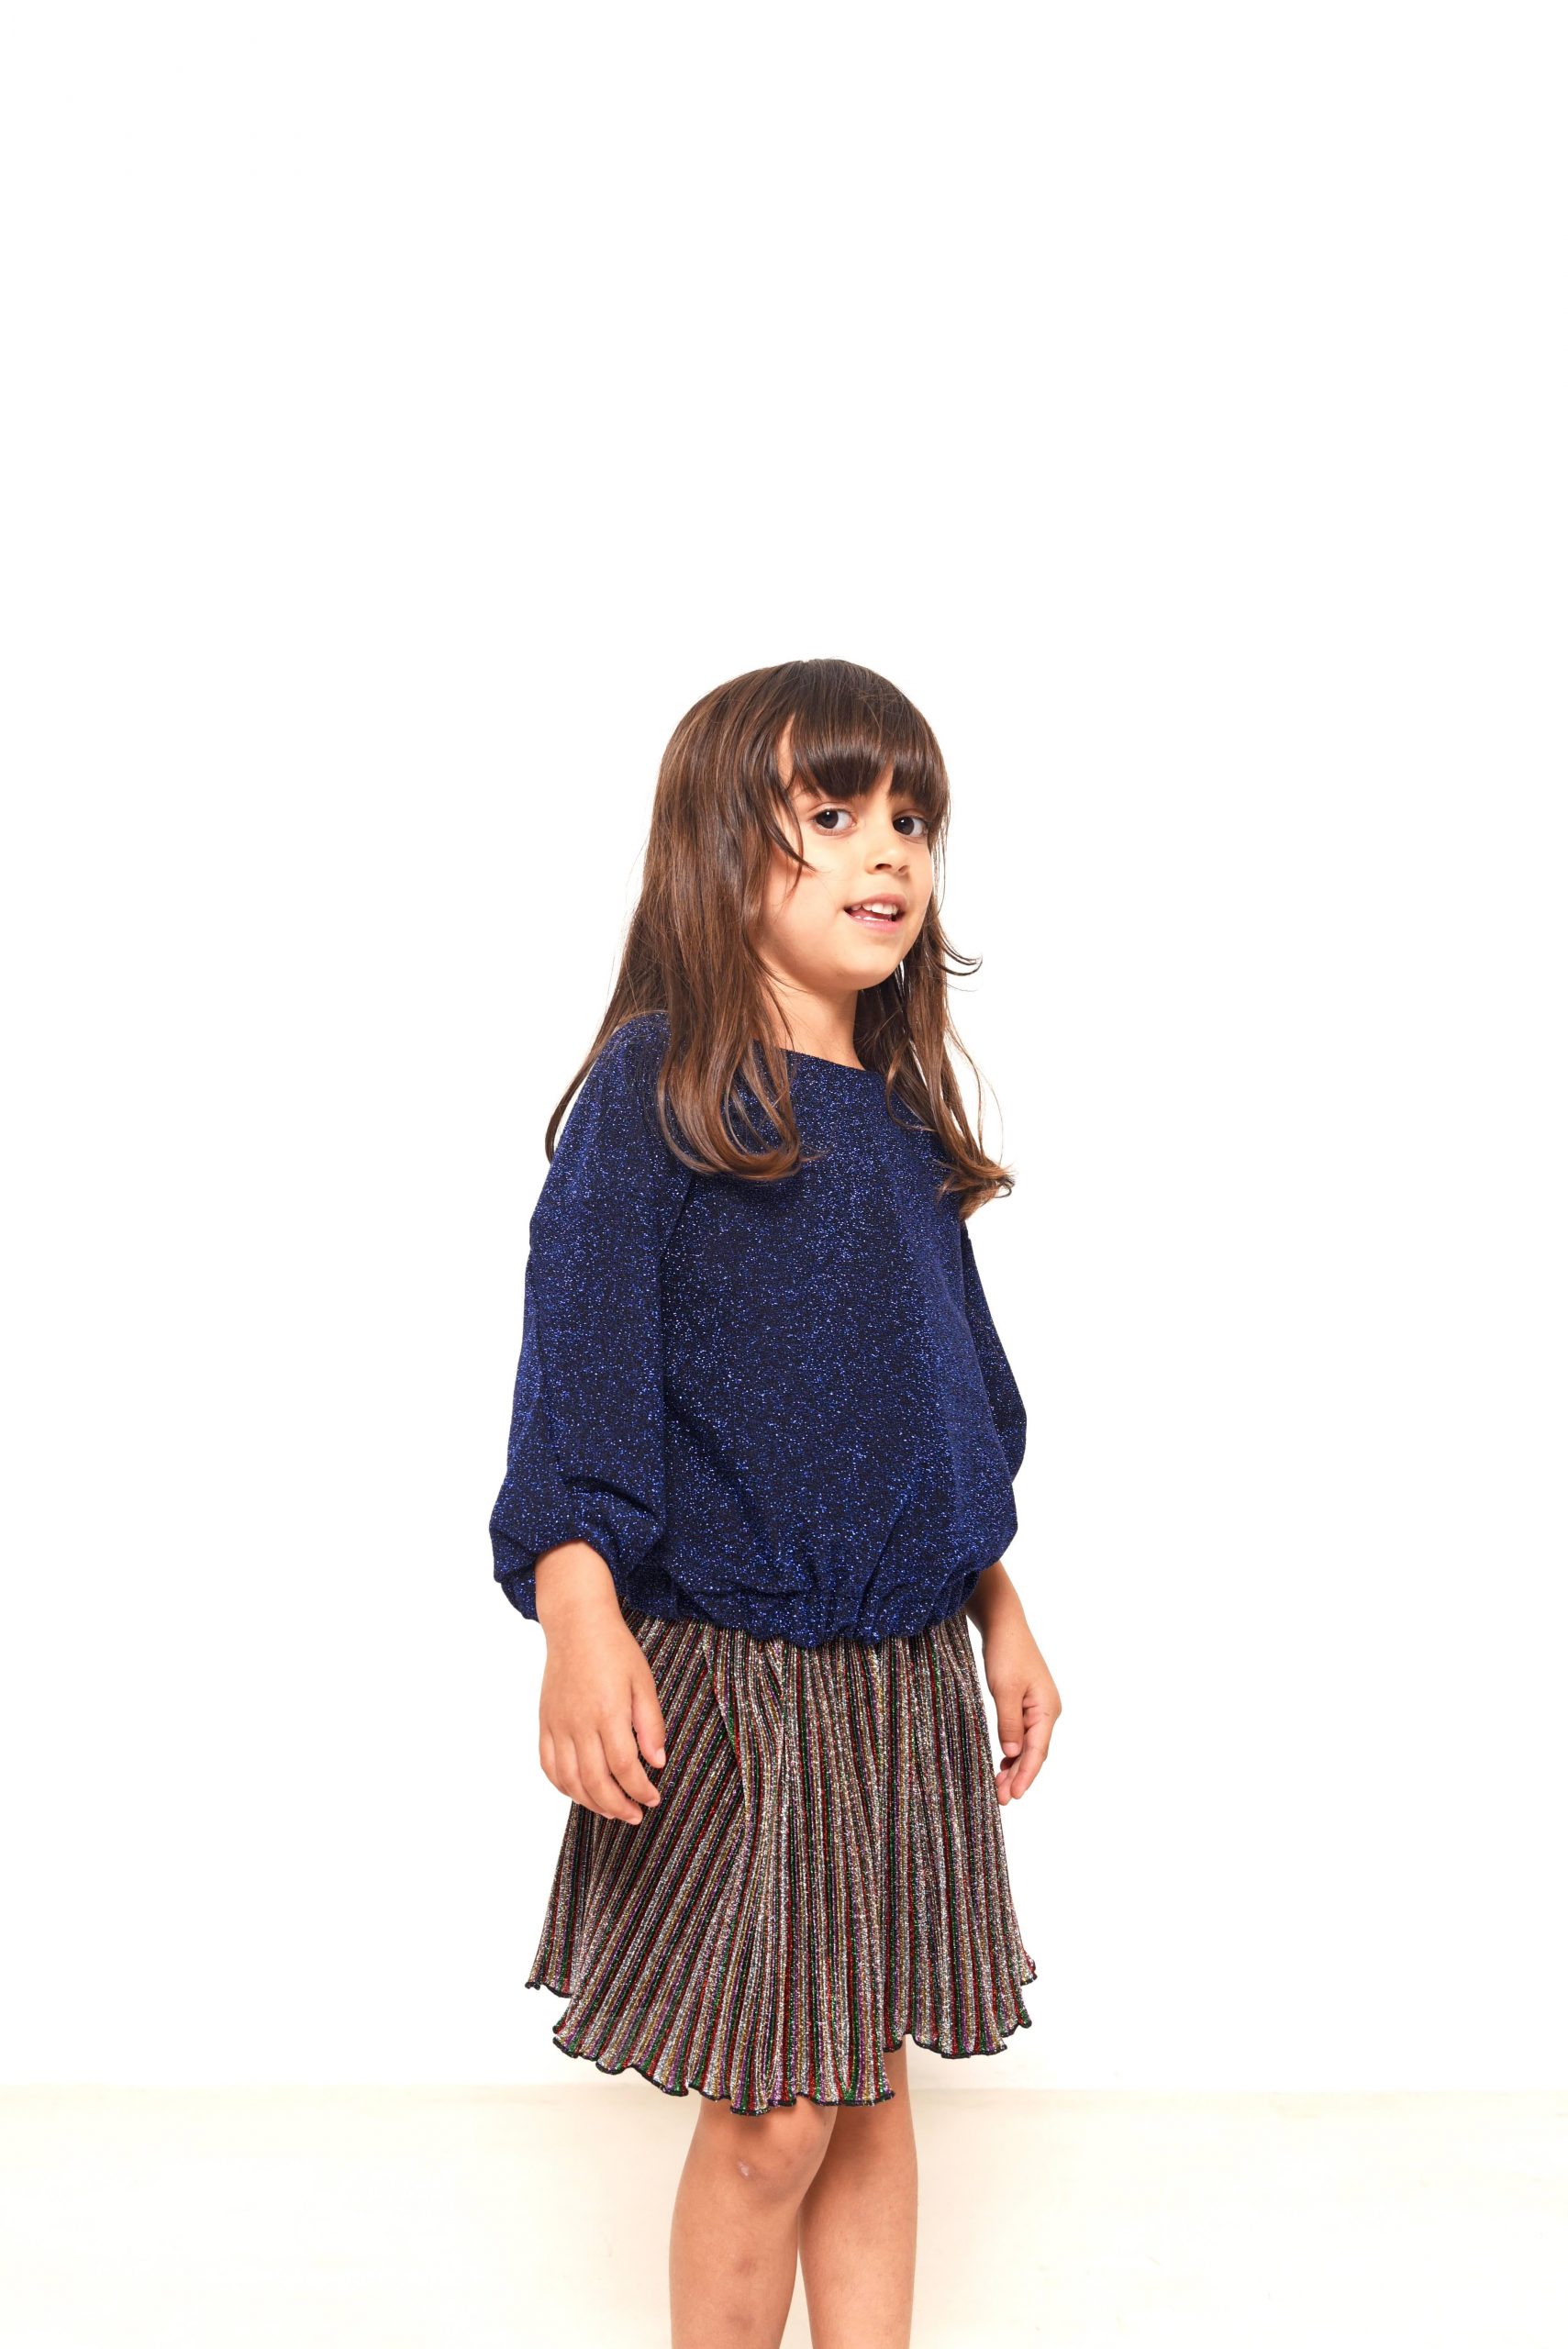 Simplicity Child/Teen Tunic and Leggings S8566 - The Fold Line